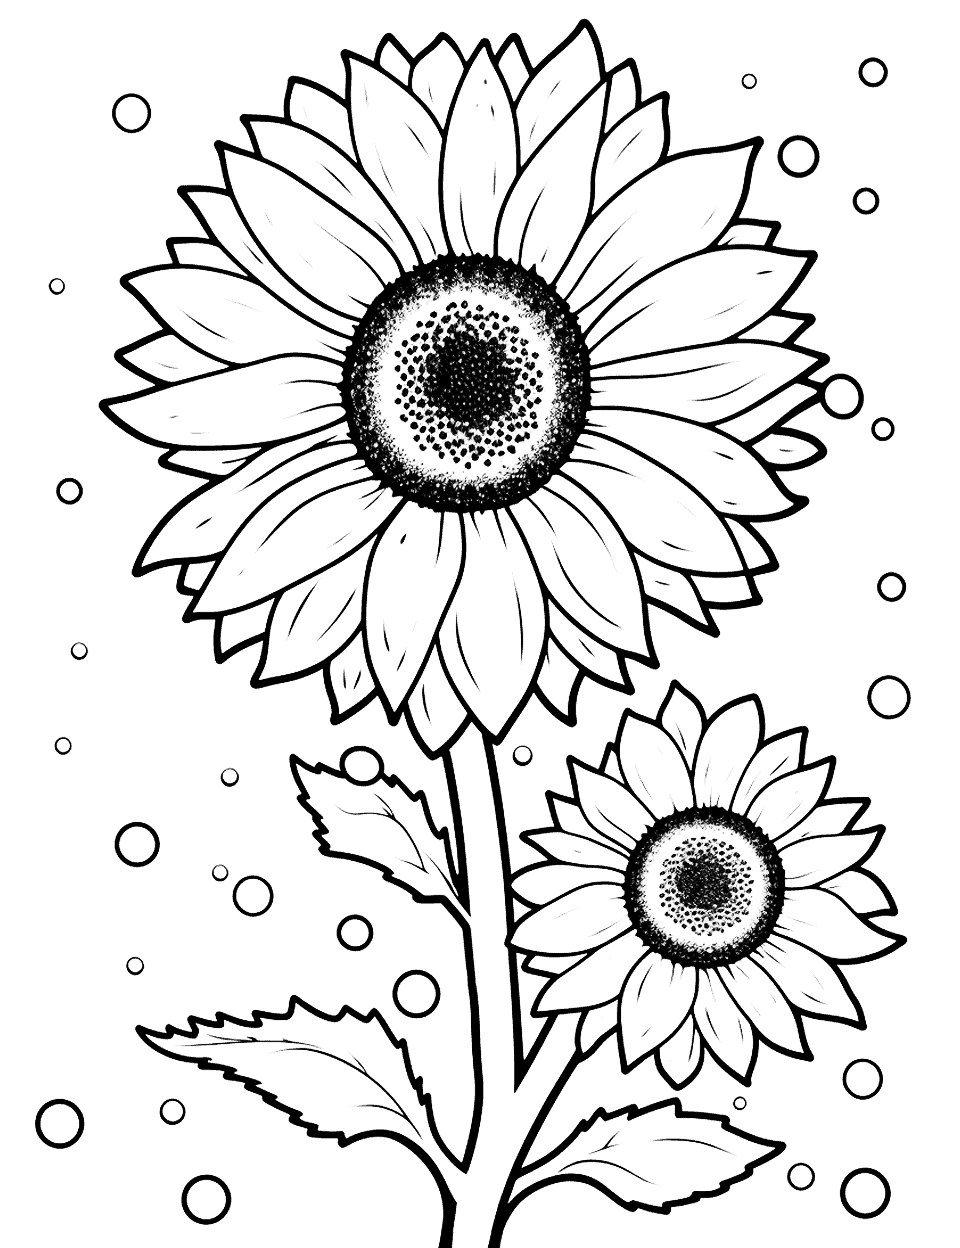 Sunflower and Bubbles Coloring Page - A sunflower with bubbles floating around it.